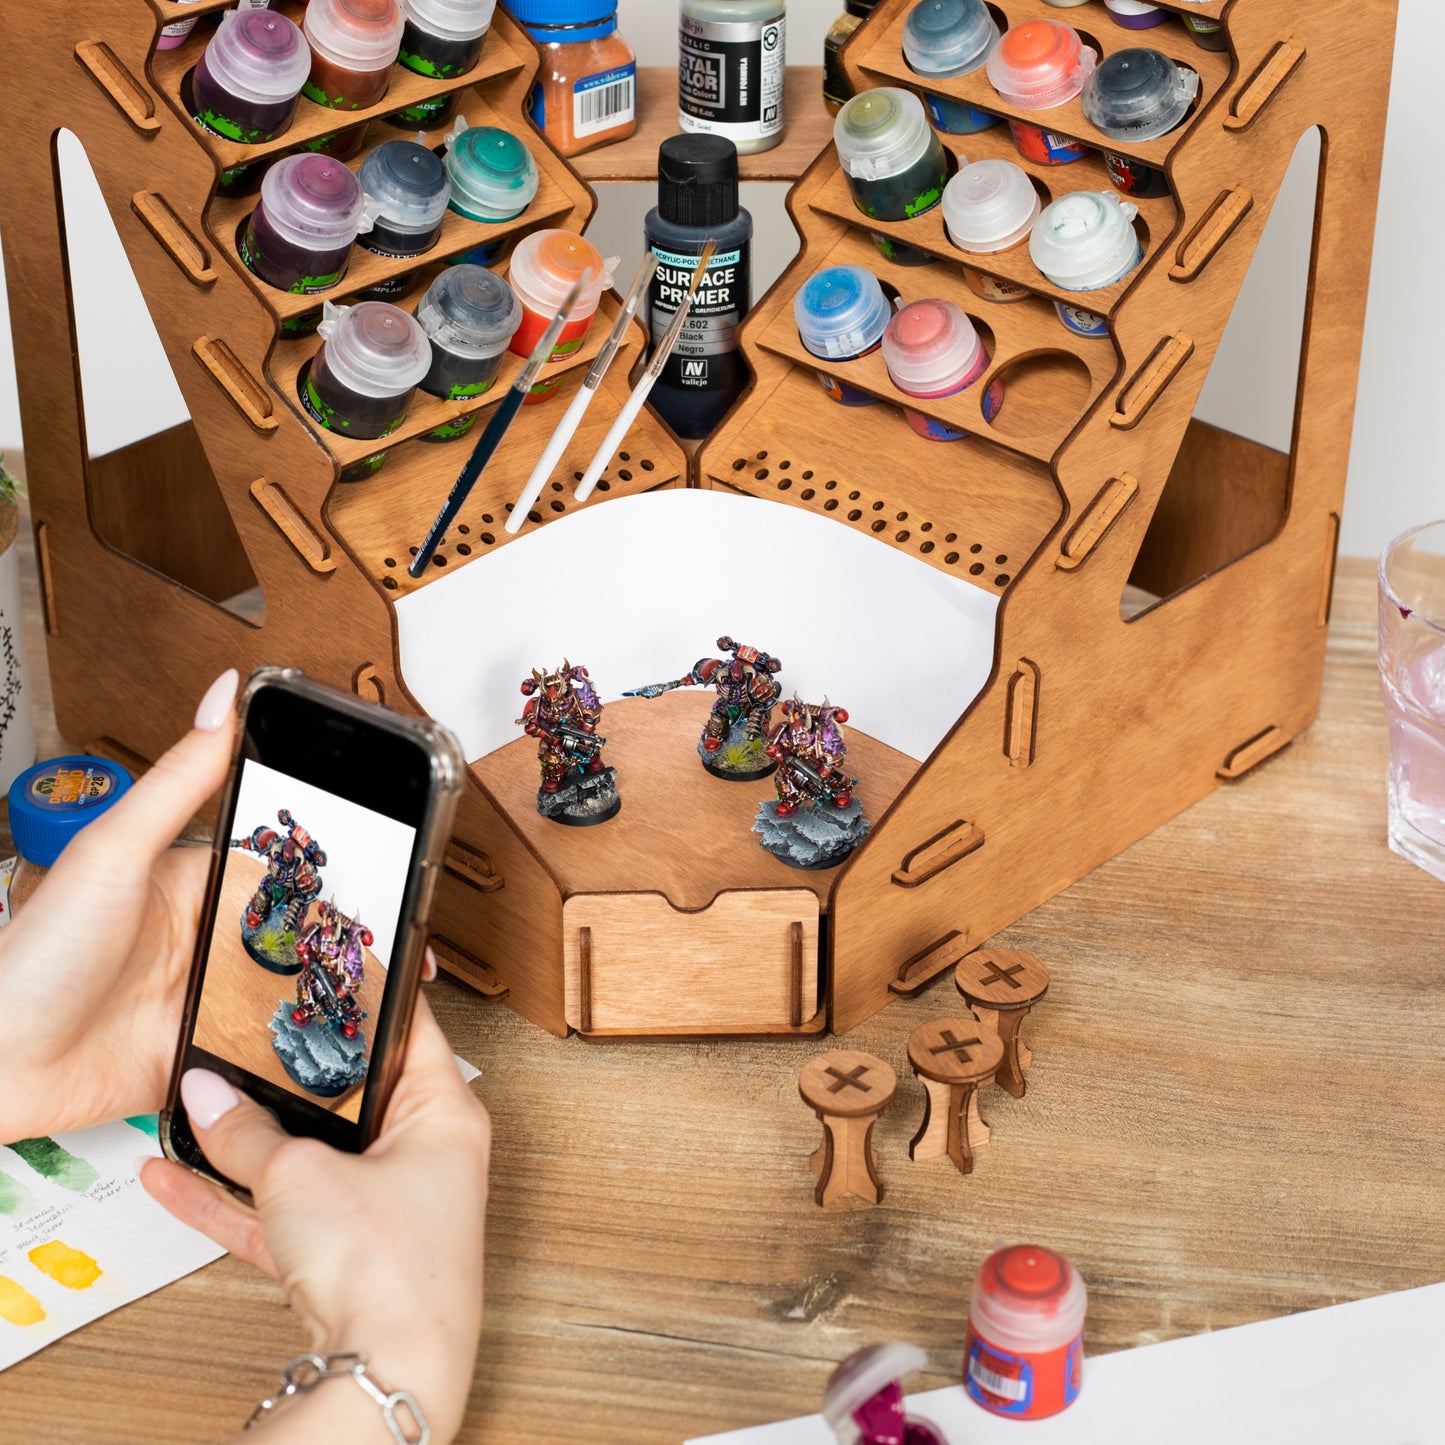 PLYDOLEX Wooden Corner Paint Organizer for 32 Bottles of Paints and 46 Paint Brushes - Paint Rack Organizer with 6 Miniature Stands and Scene for Photo-Shooting - Intended for Miniature Paint Set